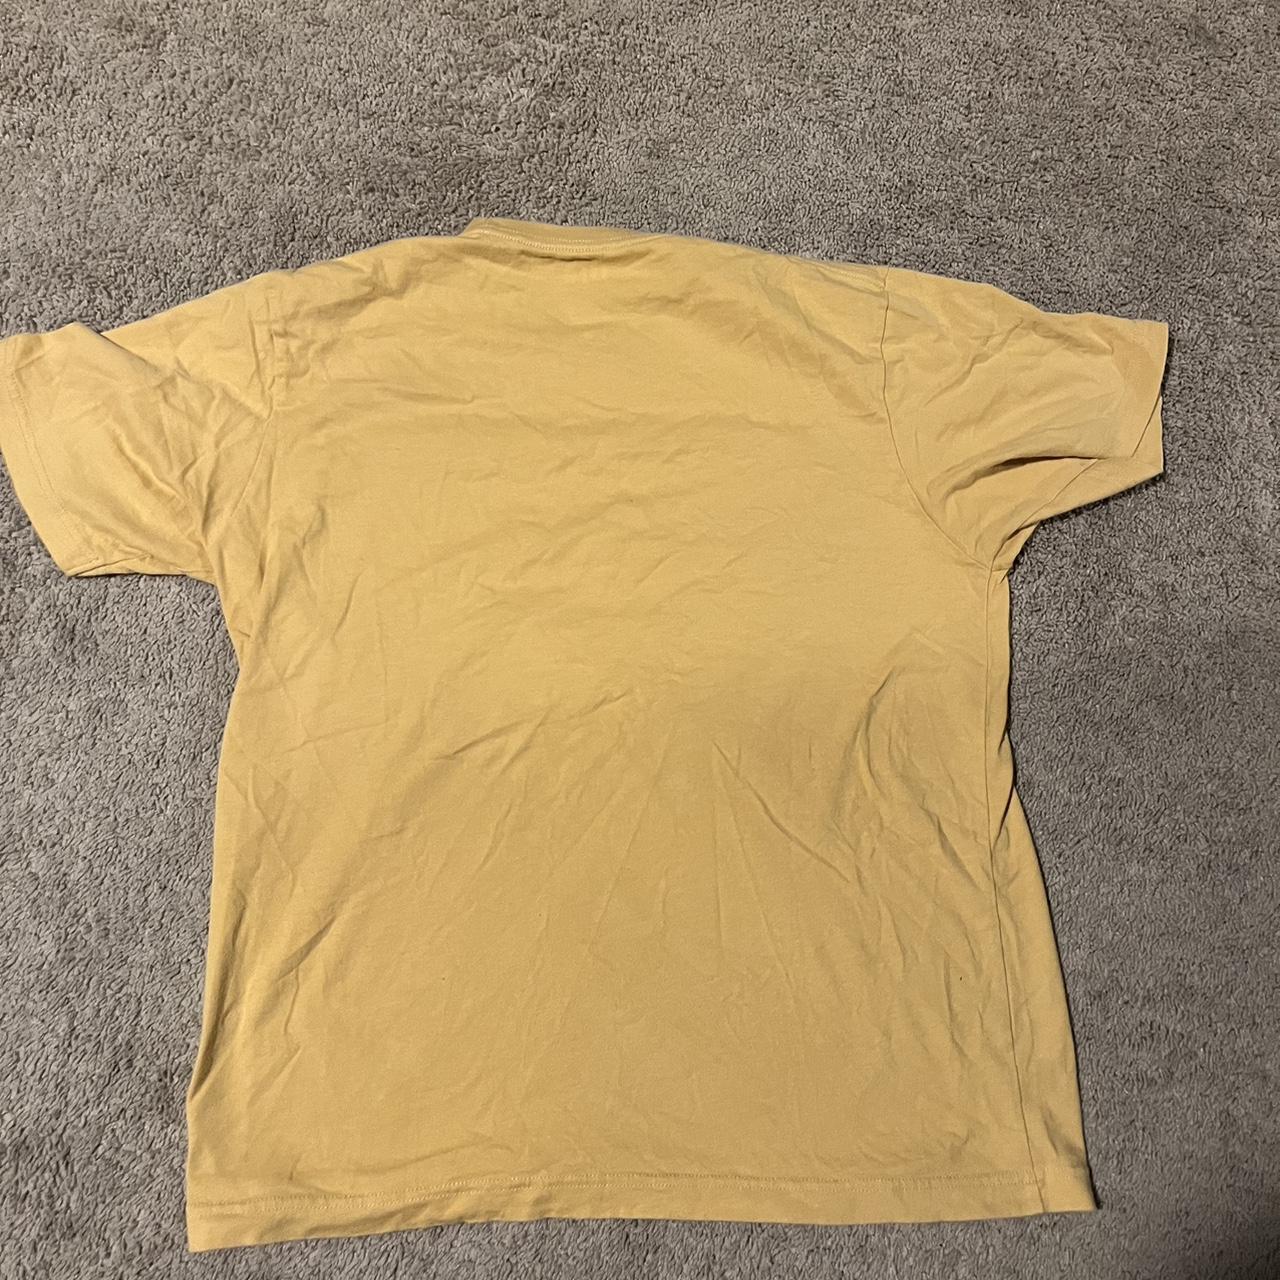 UNIQLO Men's Gold and Yellow T-shirt | Depop